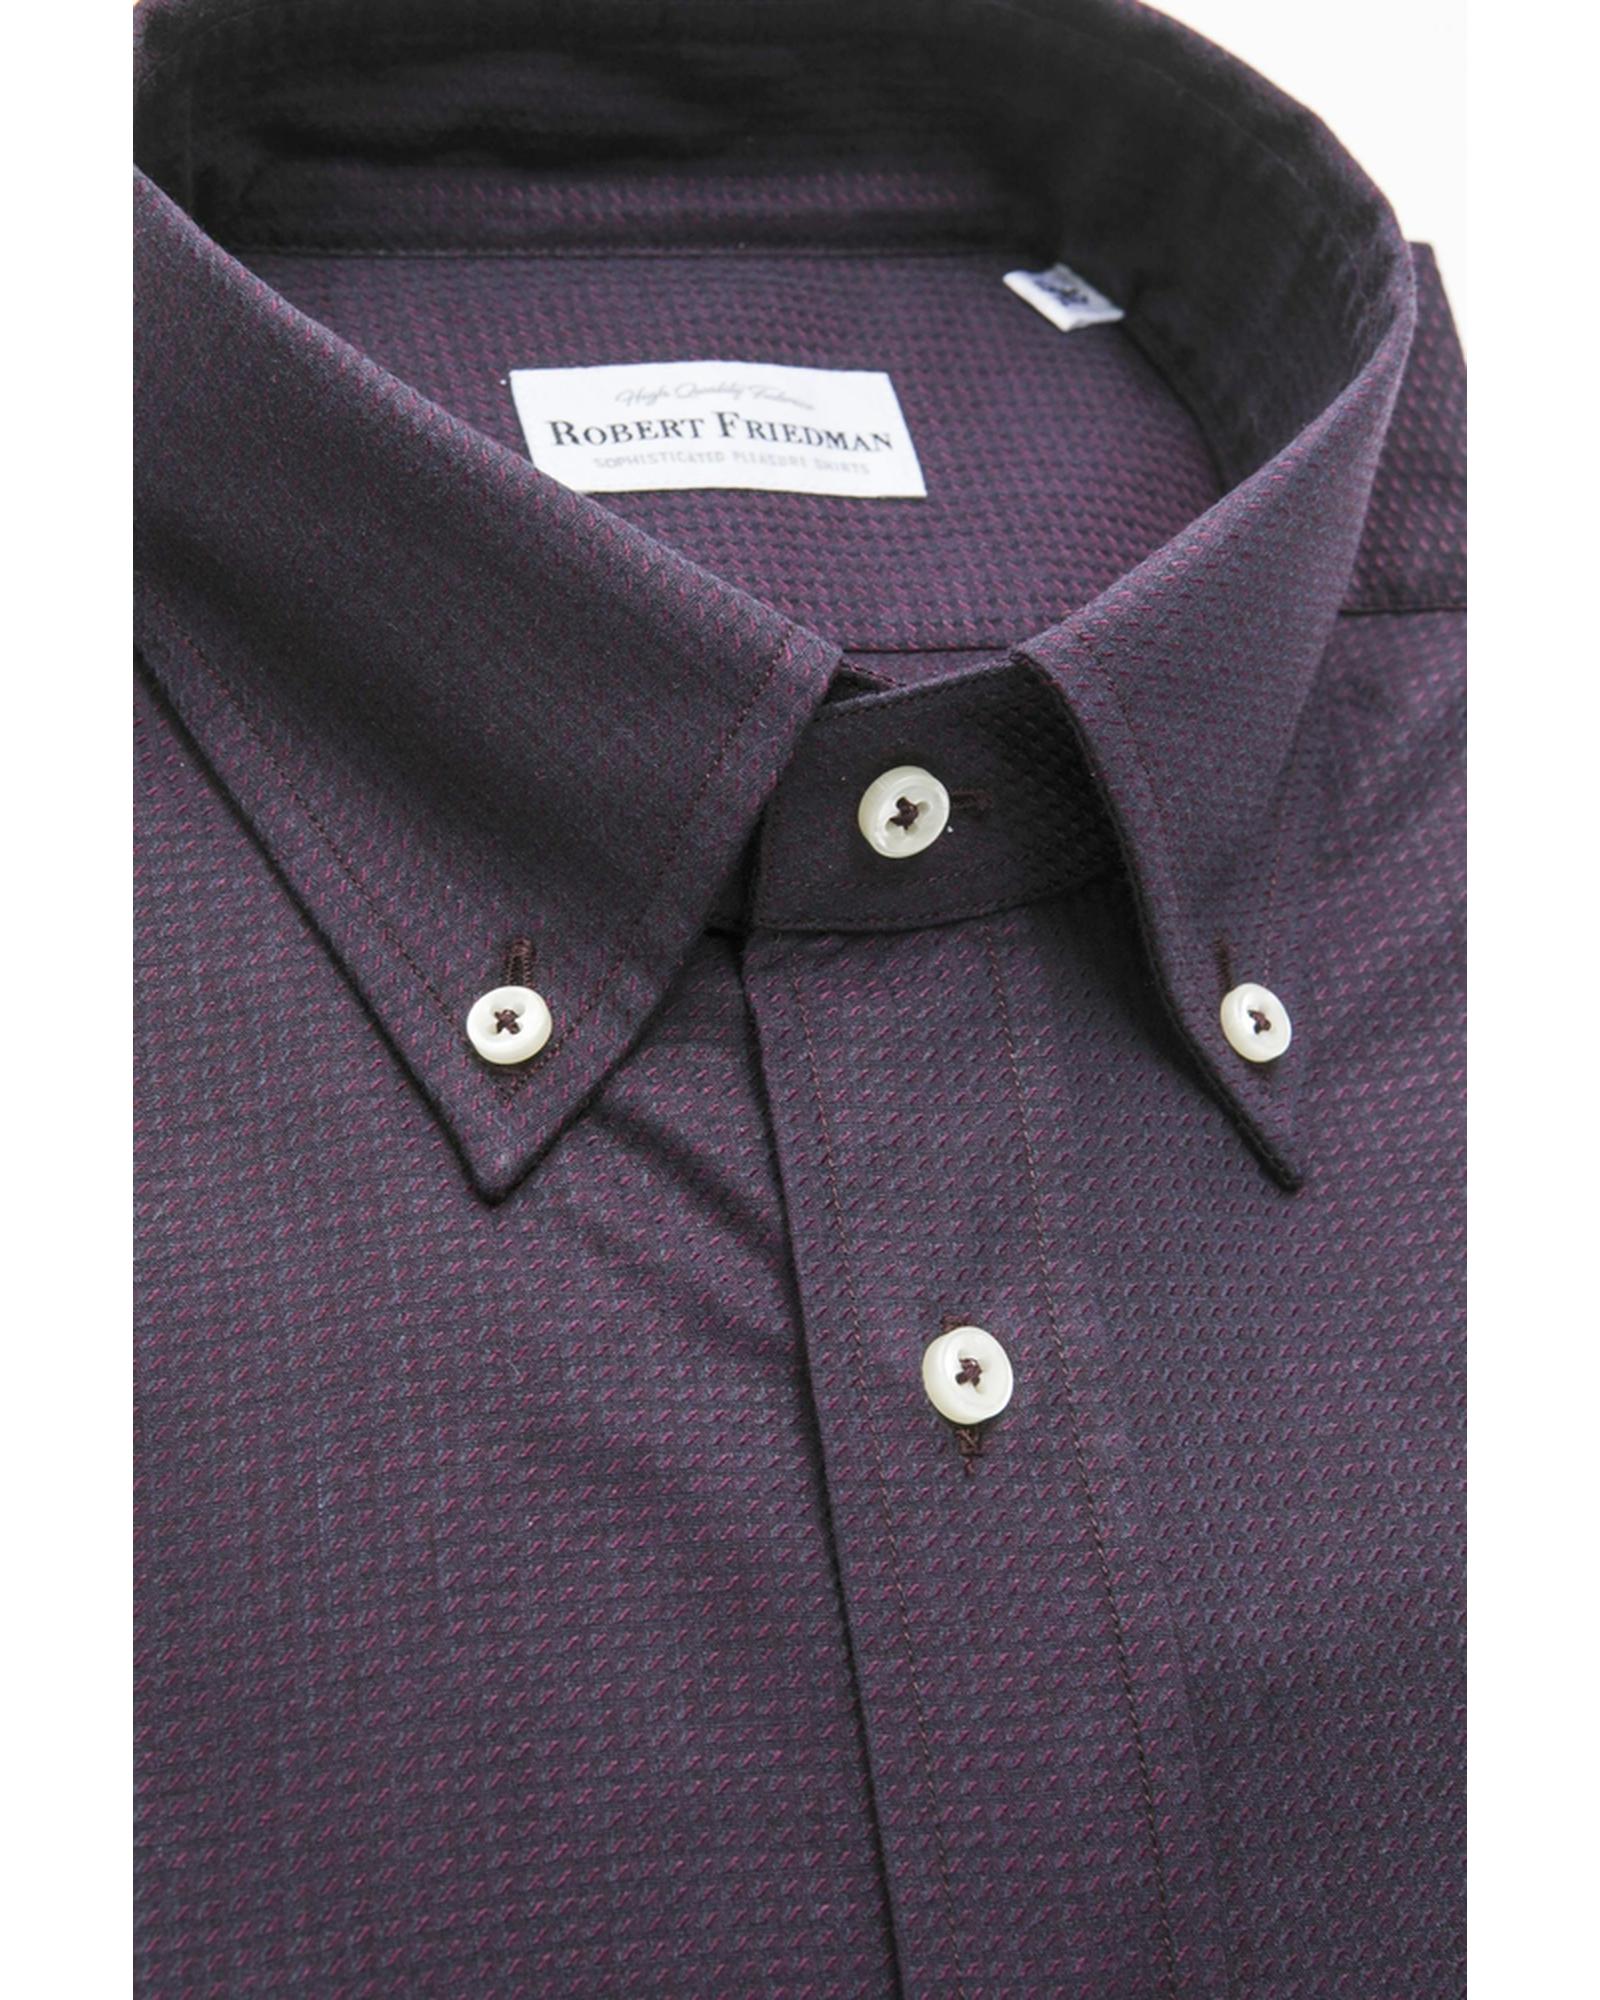 Classic Button Down Shirt for Effortless Style 42 IT Men